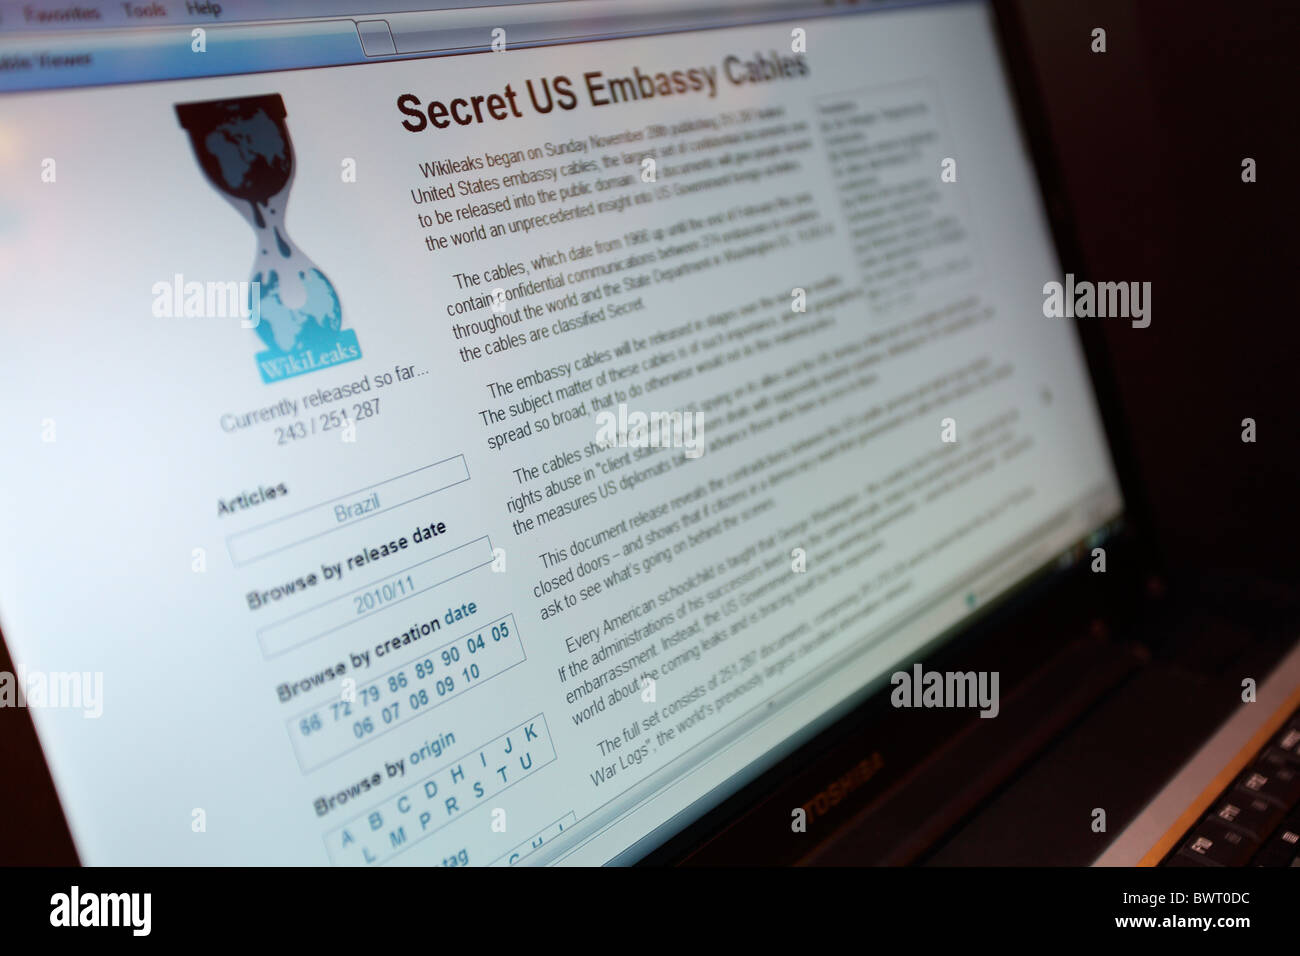 Wikileaks Website showing Secret US Embassy Cable Leaks - Editorial Use Only Stock Photo